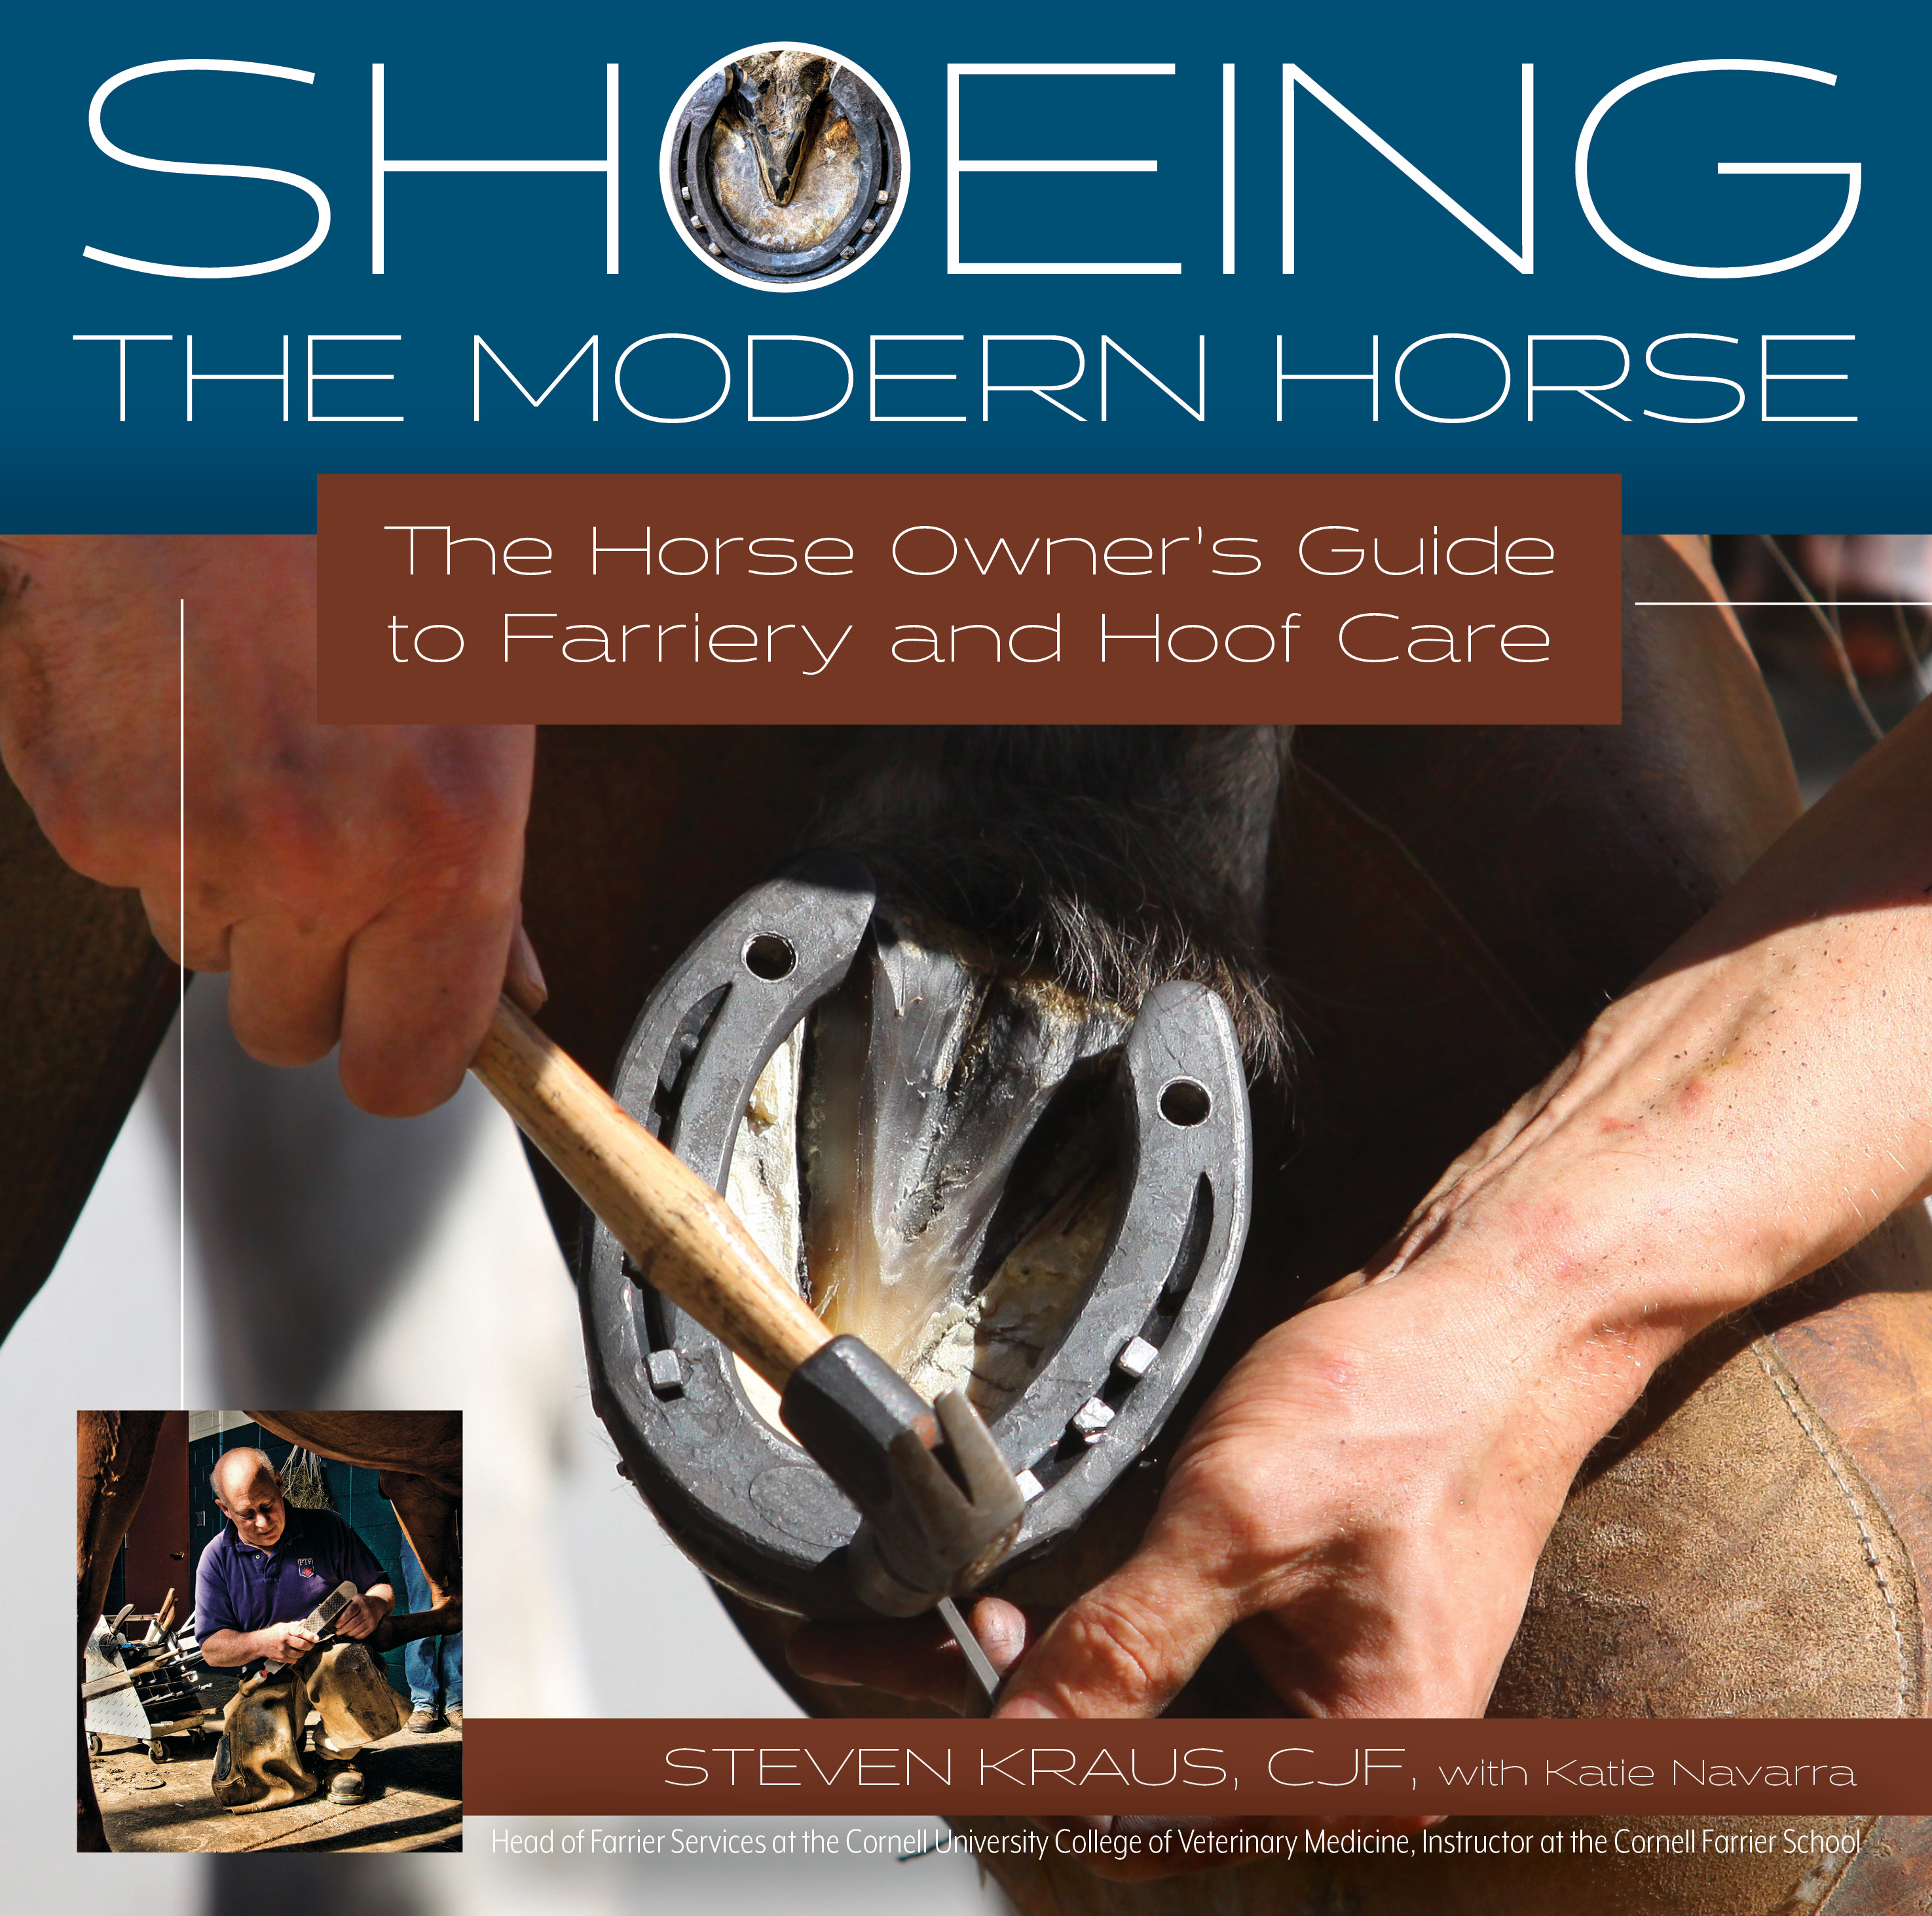 Shoeing the Modern Horse by Steven Kraus, CJF, and Katie Navarra